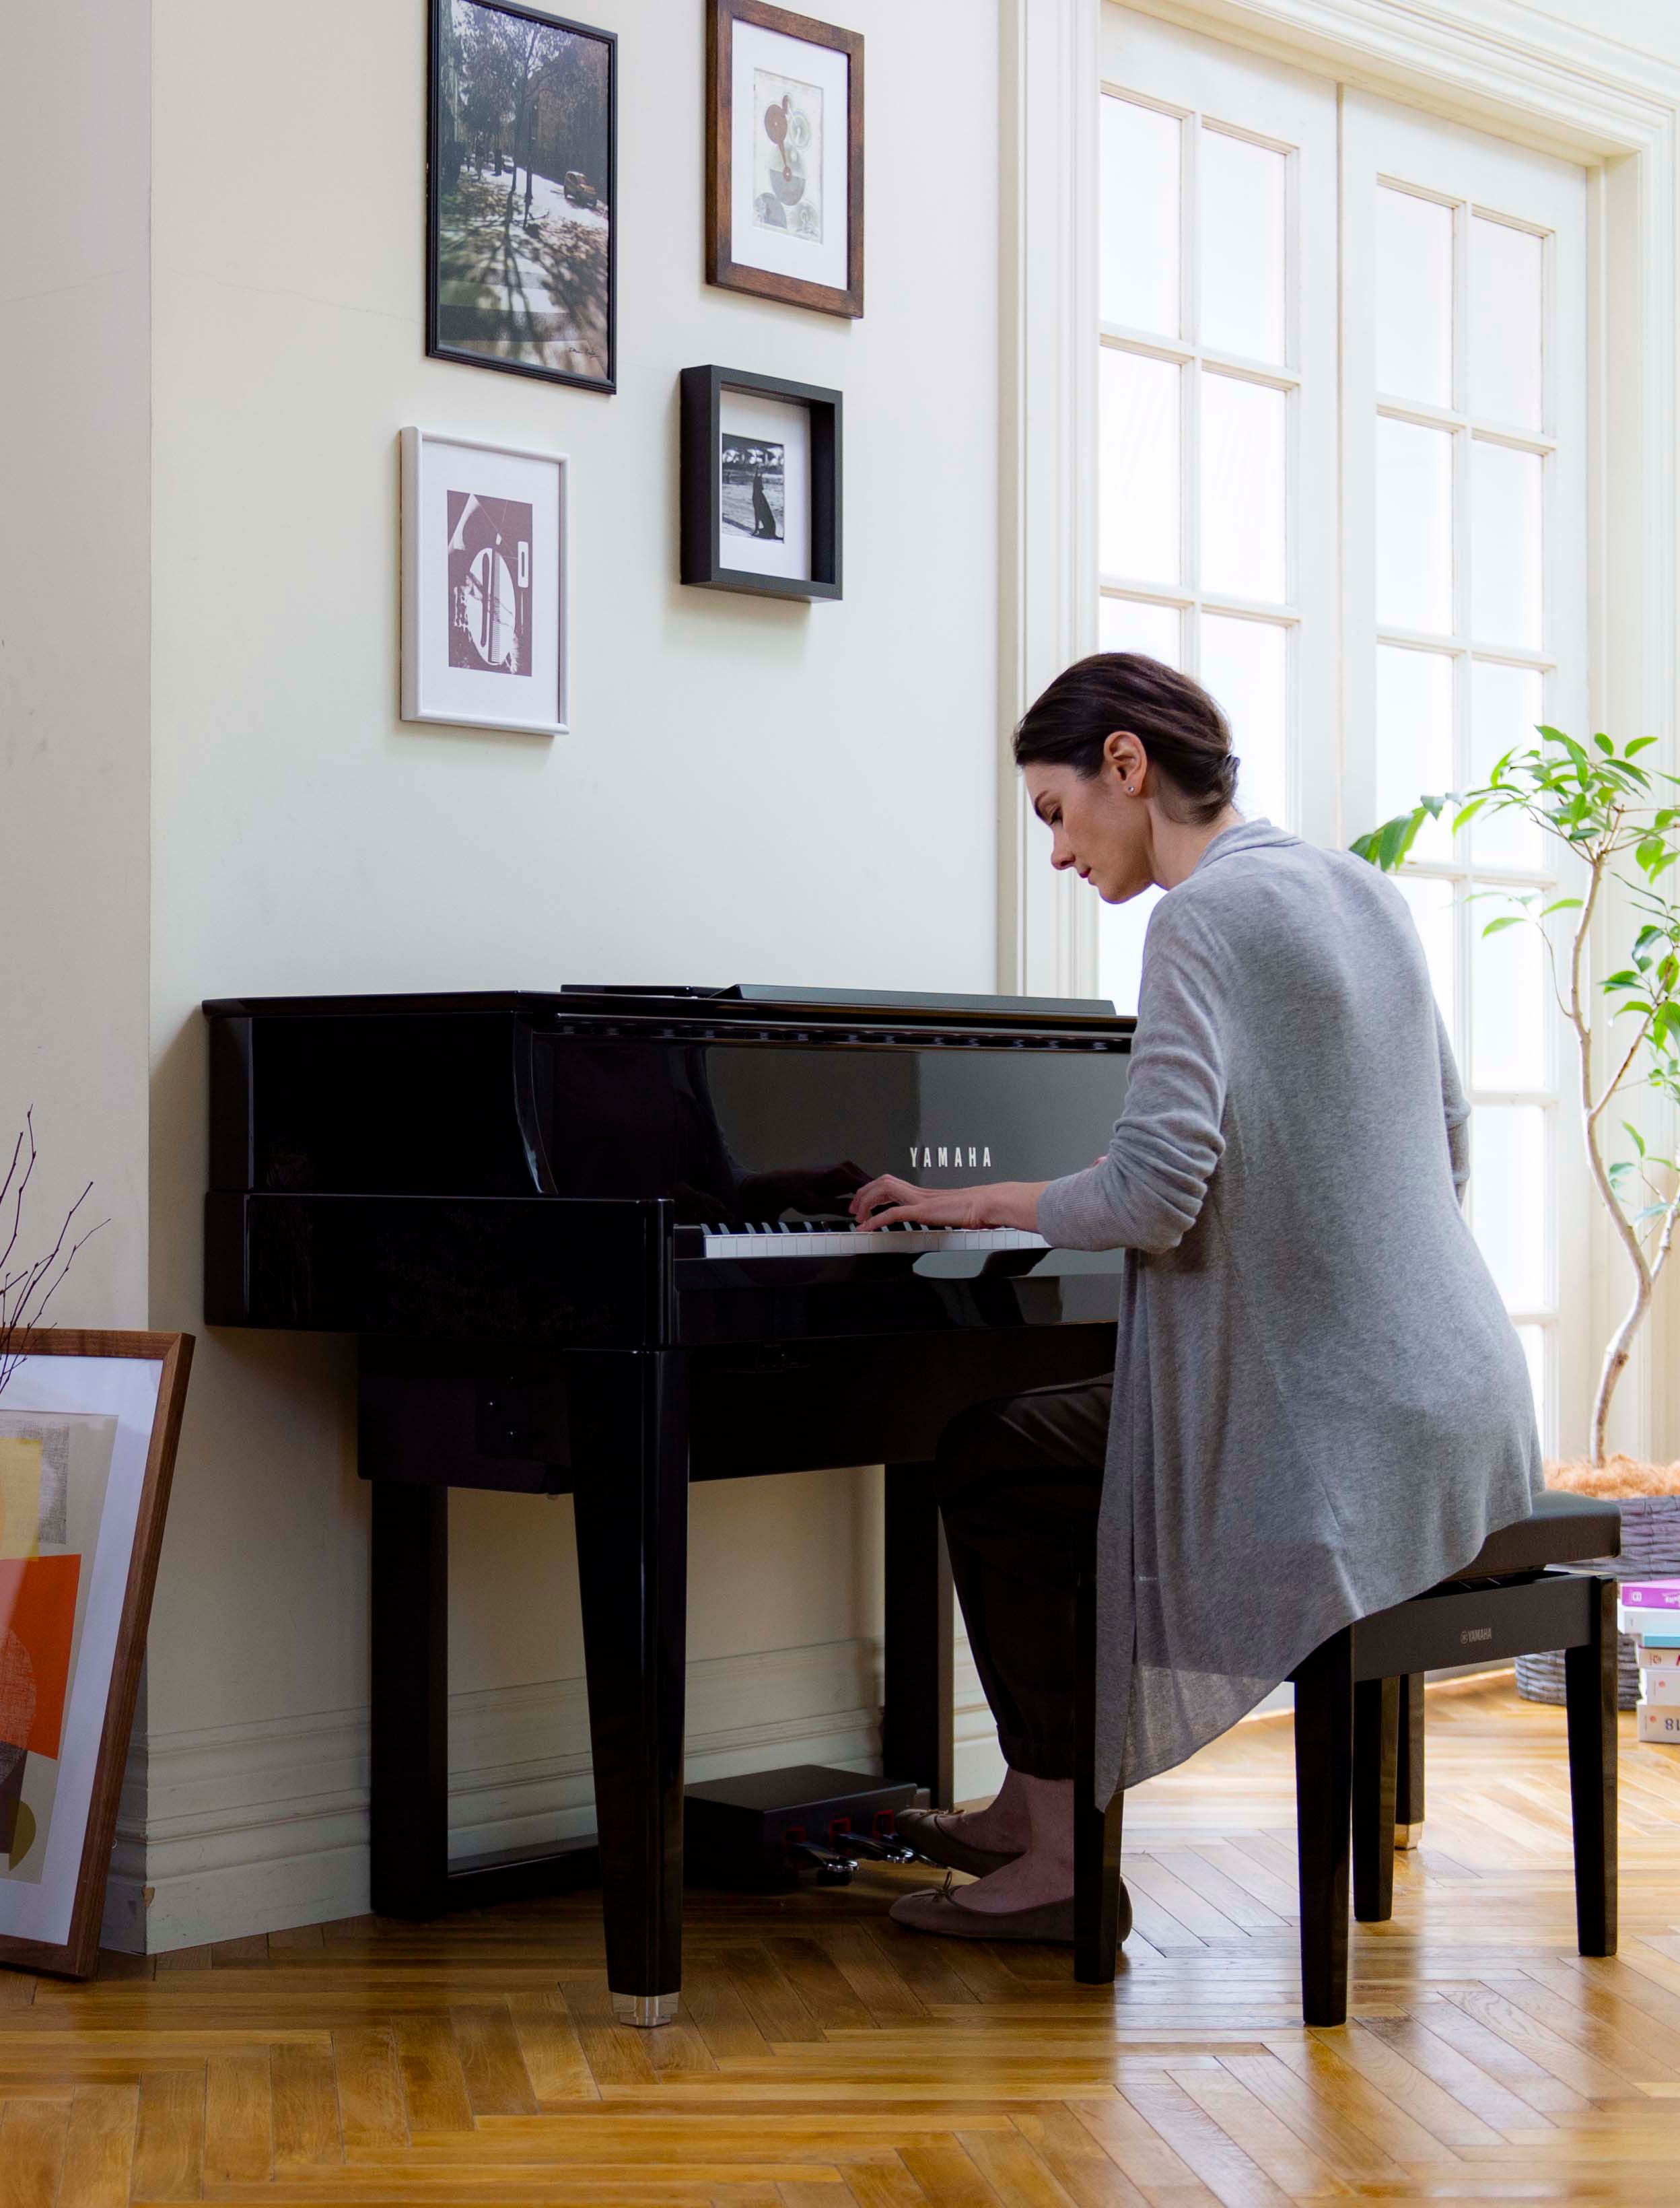 lifestyle image showing Yamaha Avantgrand piano in a room